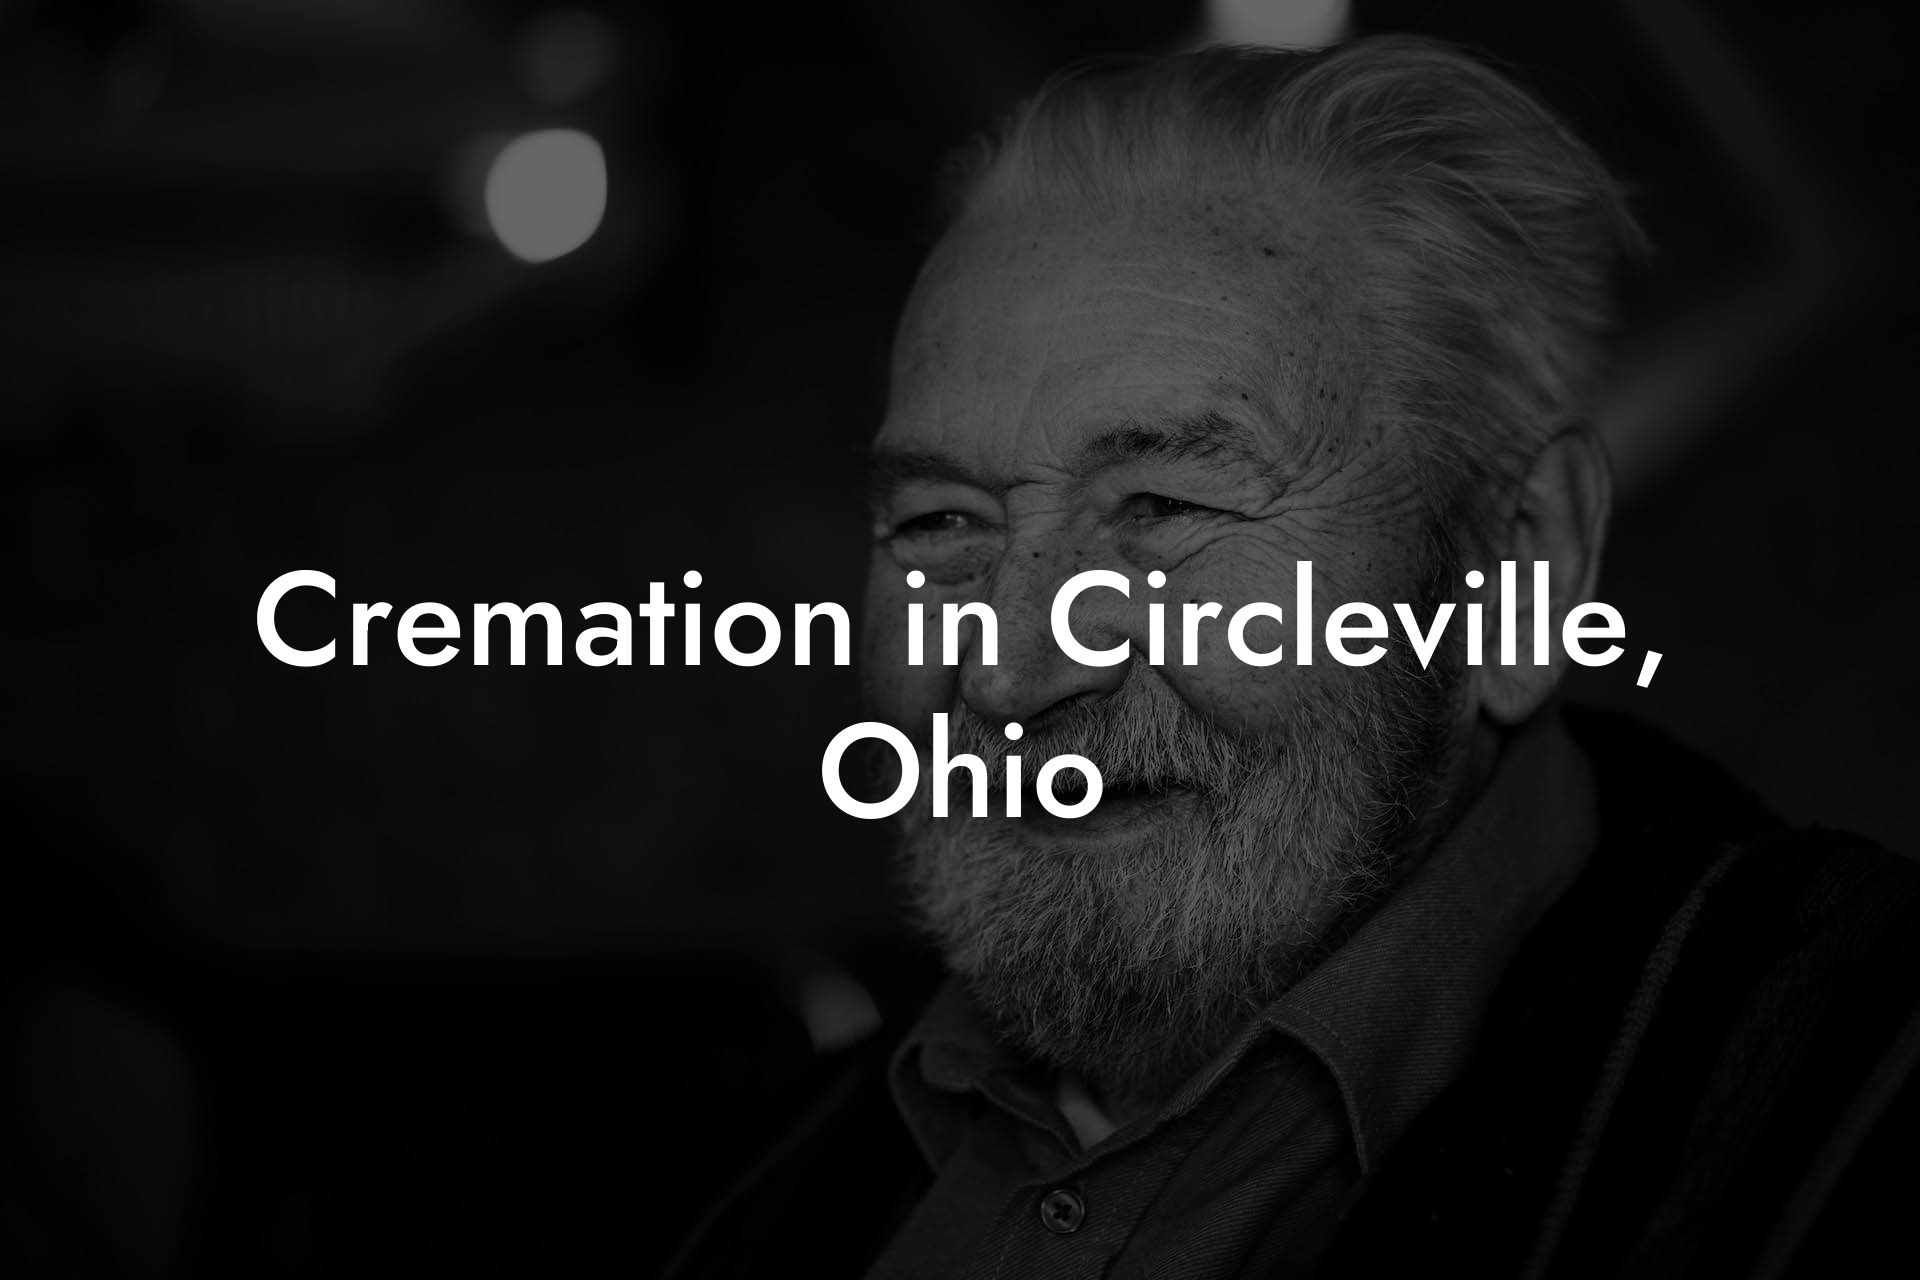 Cremation in Circleville, Ohio